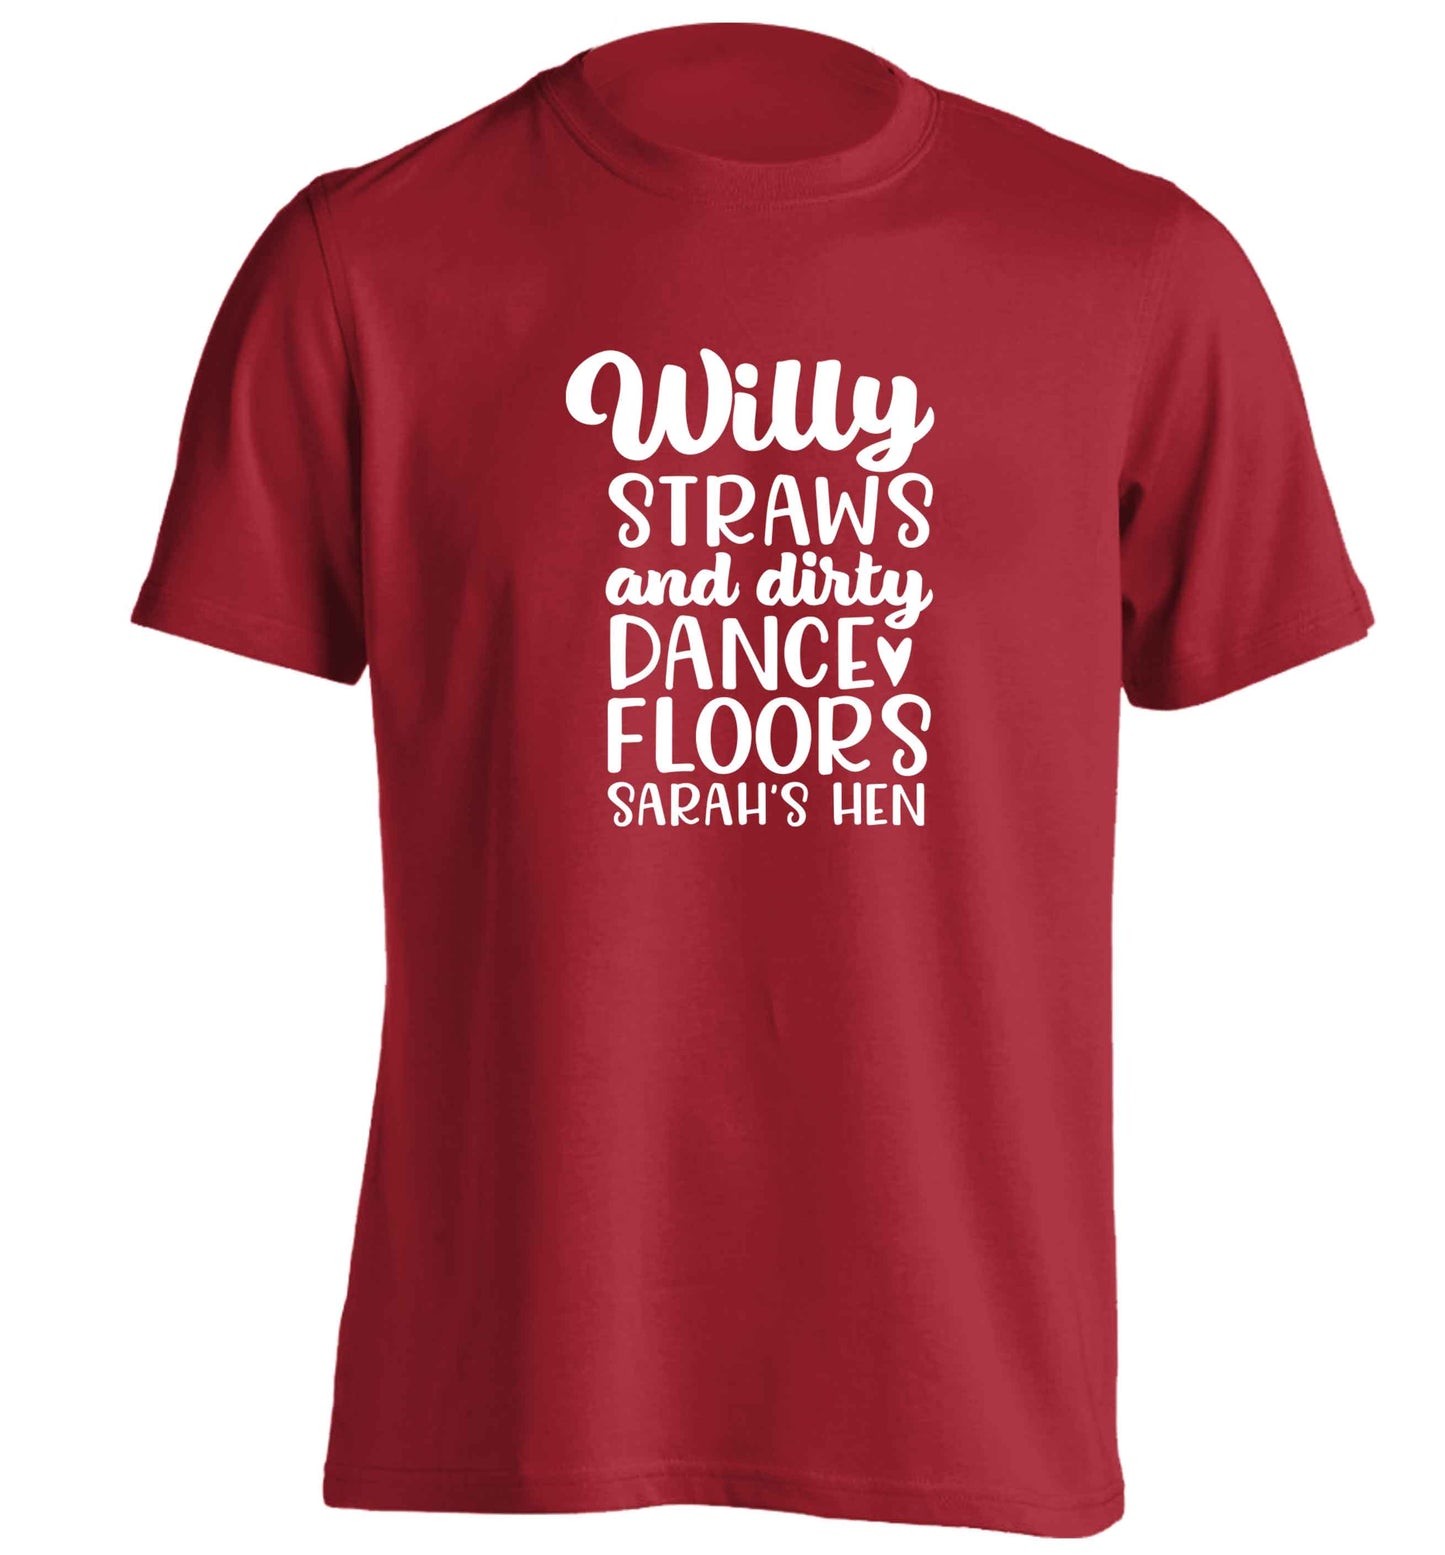 Willy straws and dirty dance floors adults unisex red Tshirt 2XL